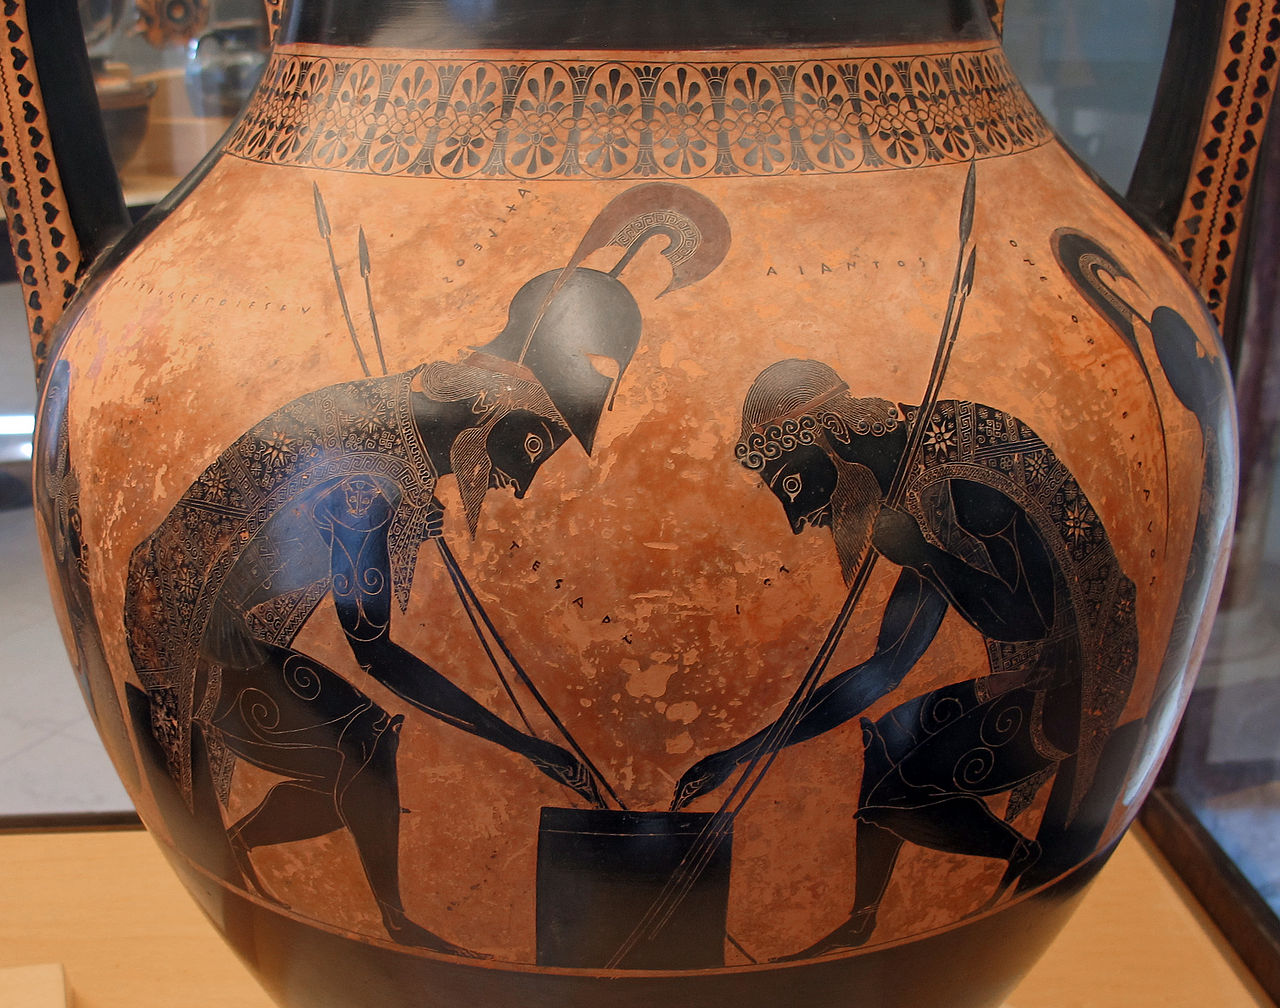 Achilles and Ajax playing dice